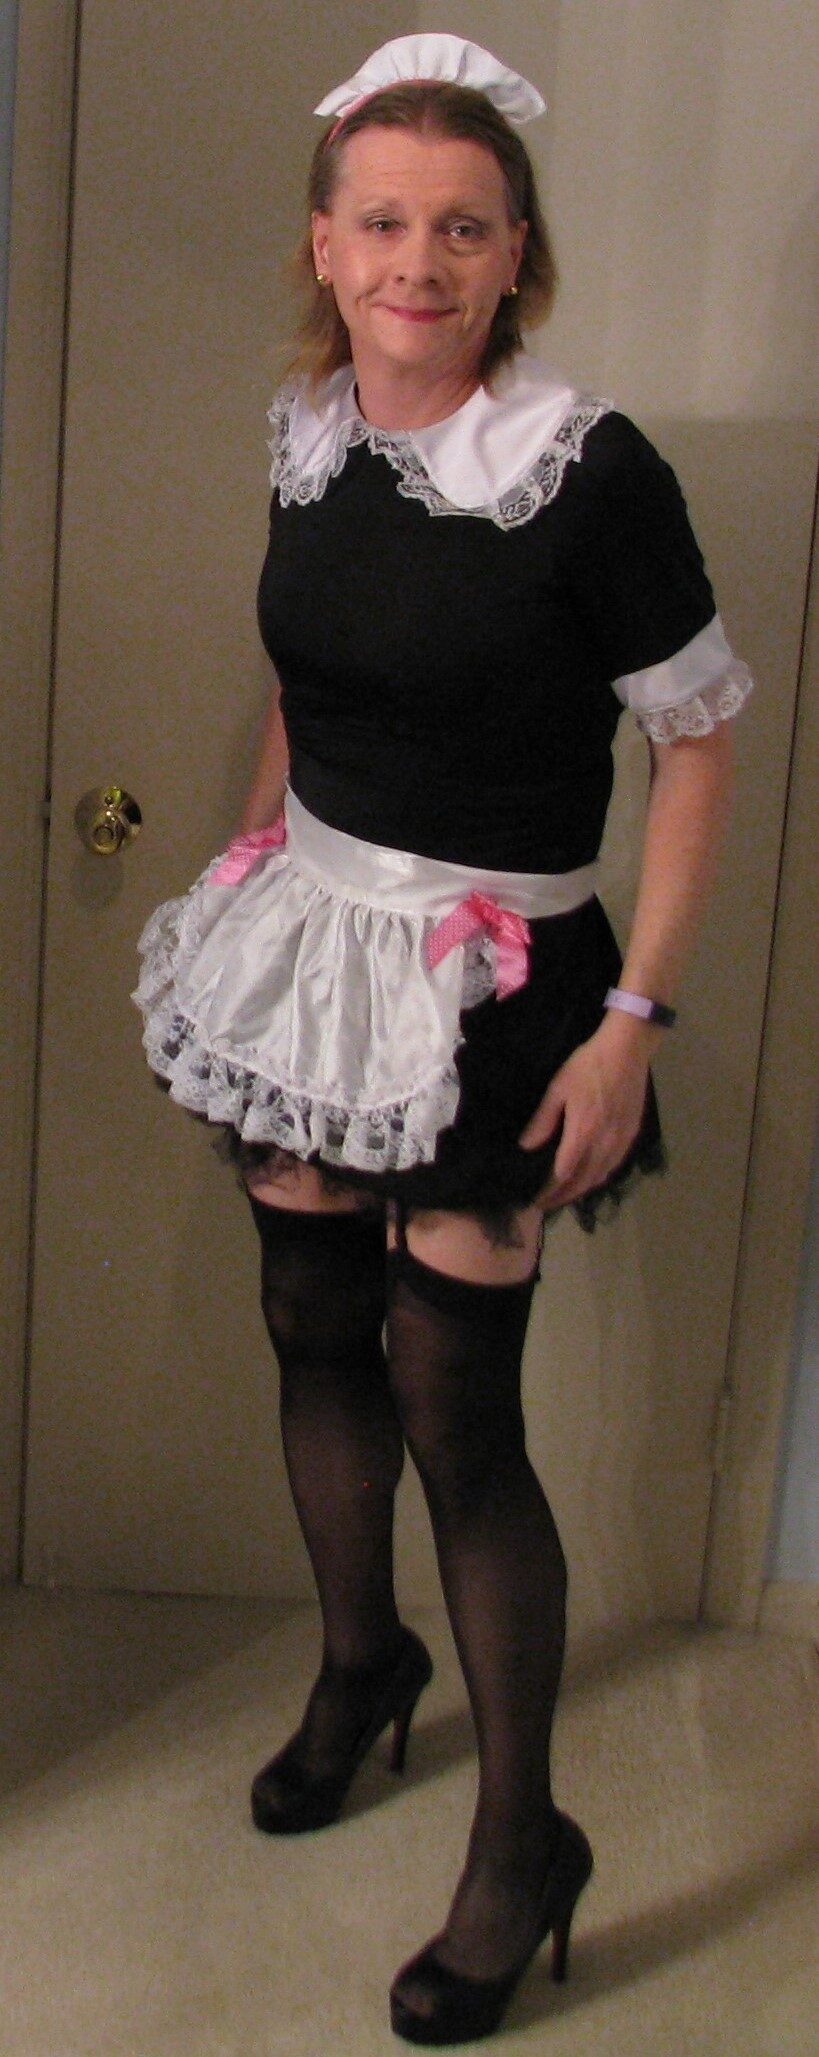 Chrisissy Sissy French Maid available to serve!